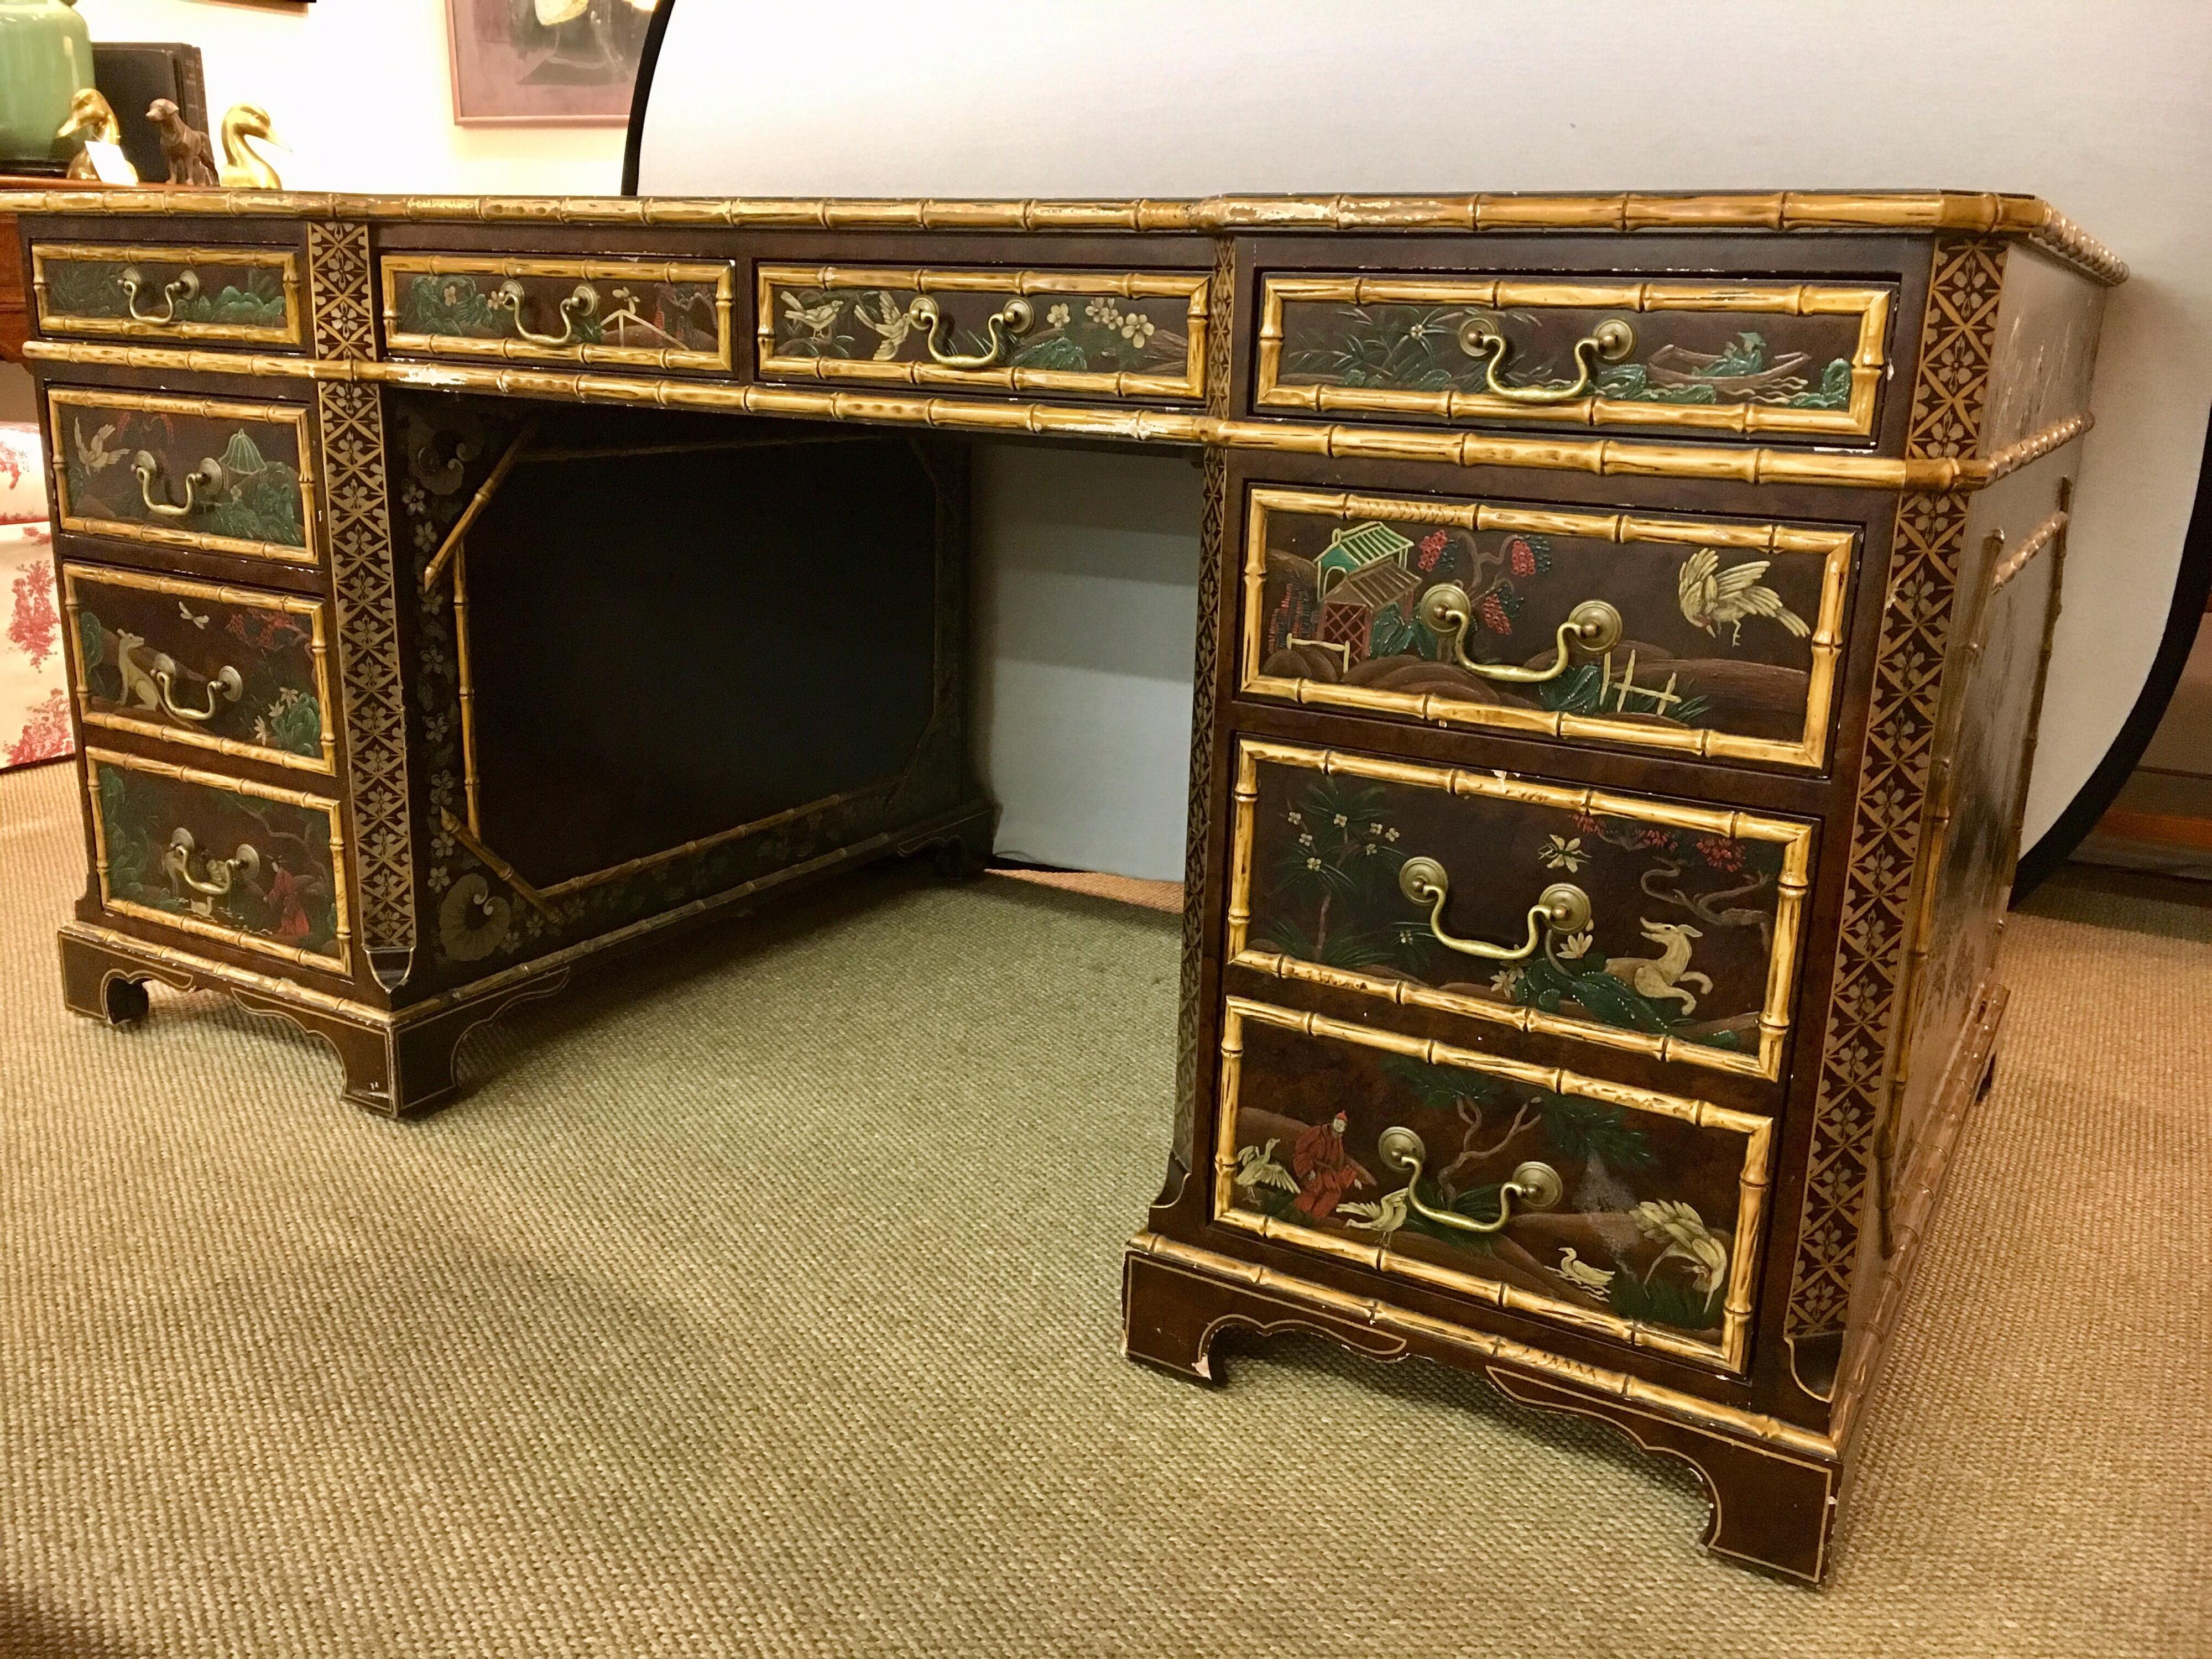 Rare oil painted Chinoiserie partners desk made by John Widdicomb. Features drawers and cabinets on both sides of the desk. It is oil painted all the way around, including the inside cabinets, doors and walls. The top of the desk is made from hand